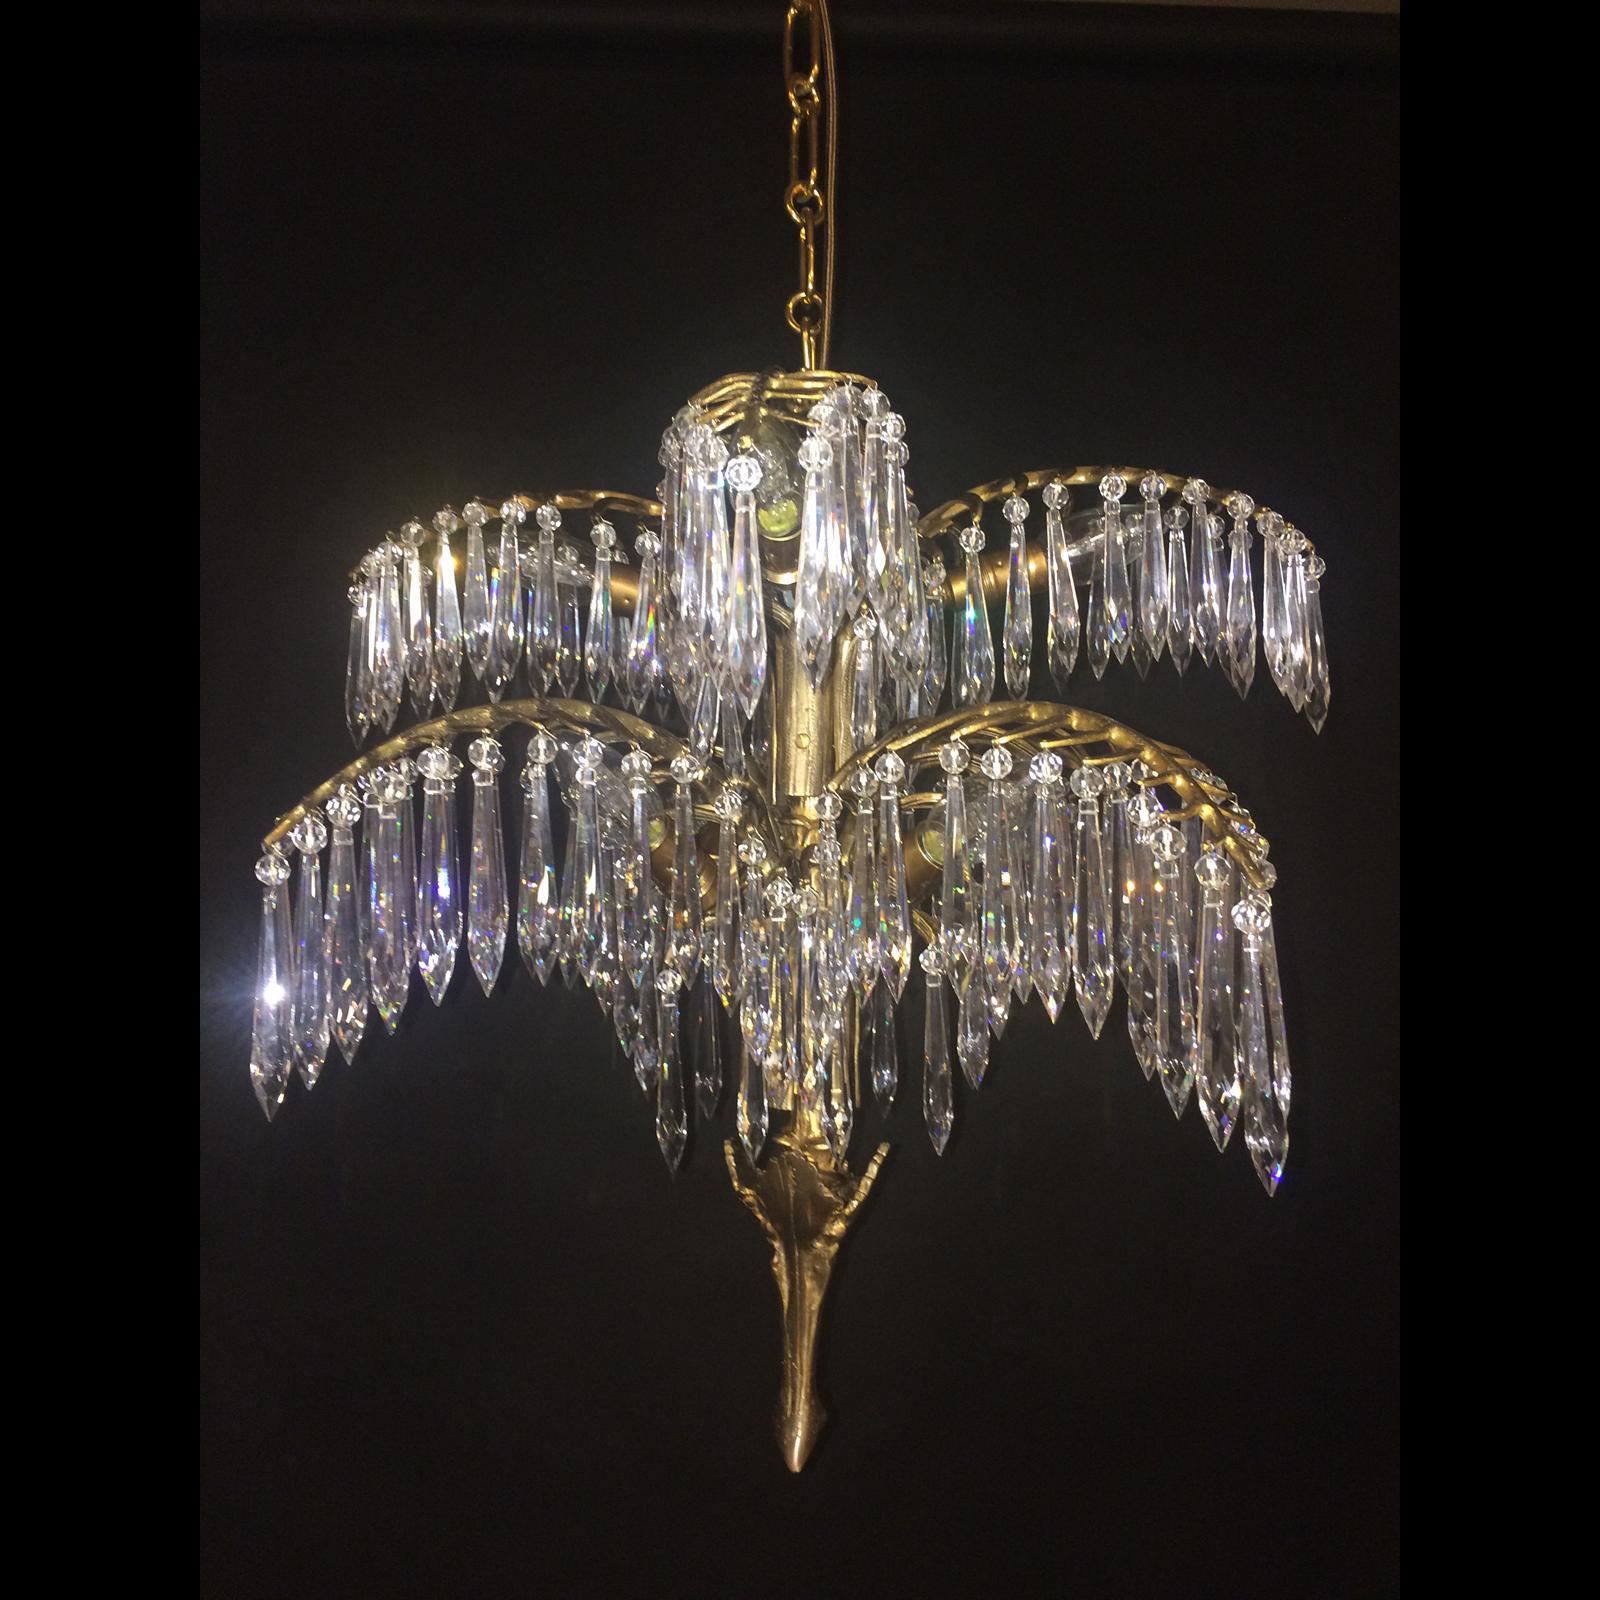 Variation of the great Palme designed by Josef Hoffmann in circa 1918
Different Variations of the chandelier are available - see our pictures below
Total drop custom made.

All components according to the UL regulations, with an additional charge we